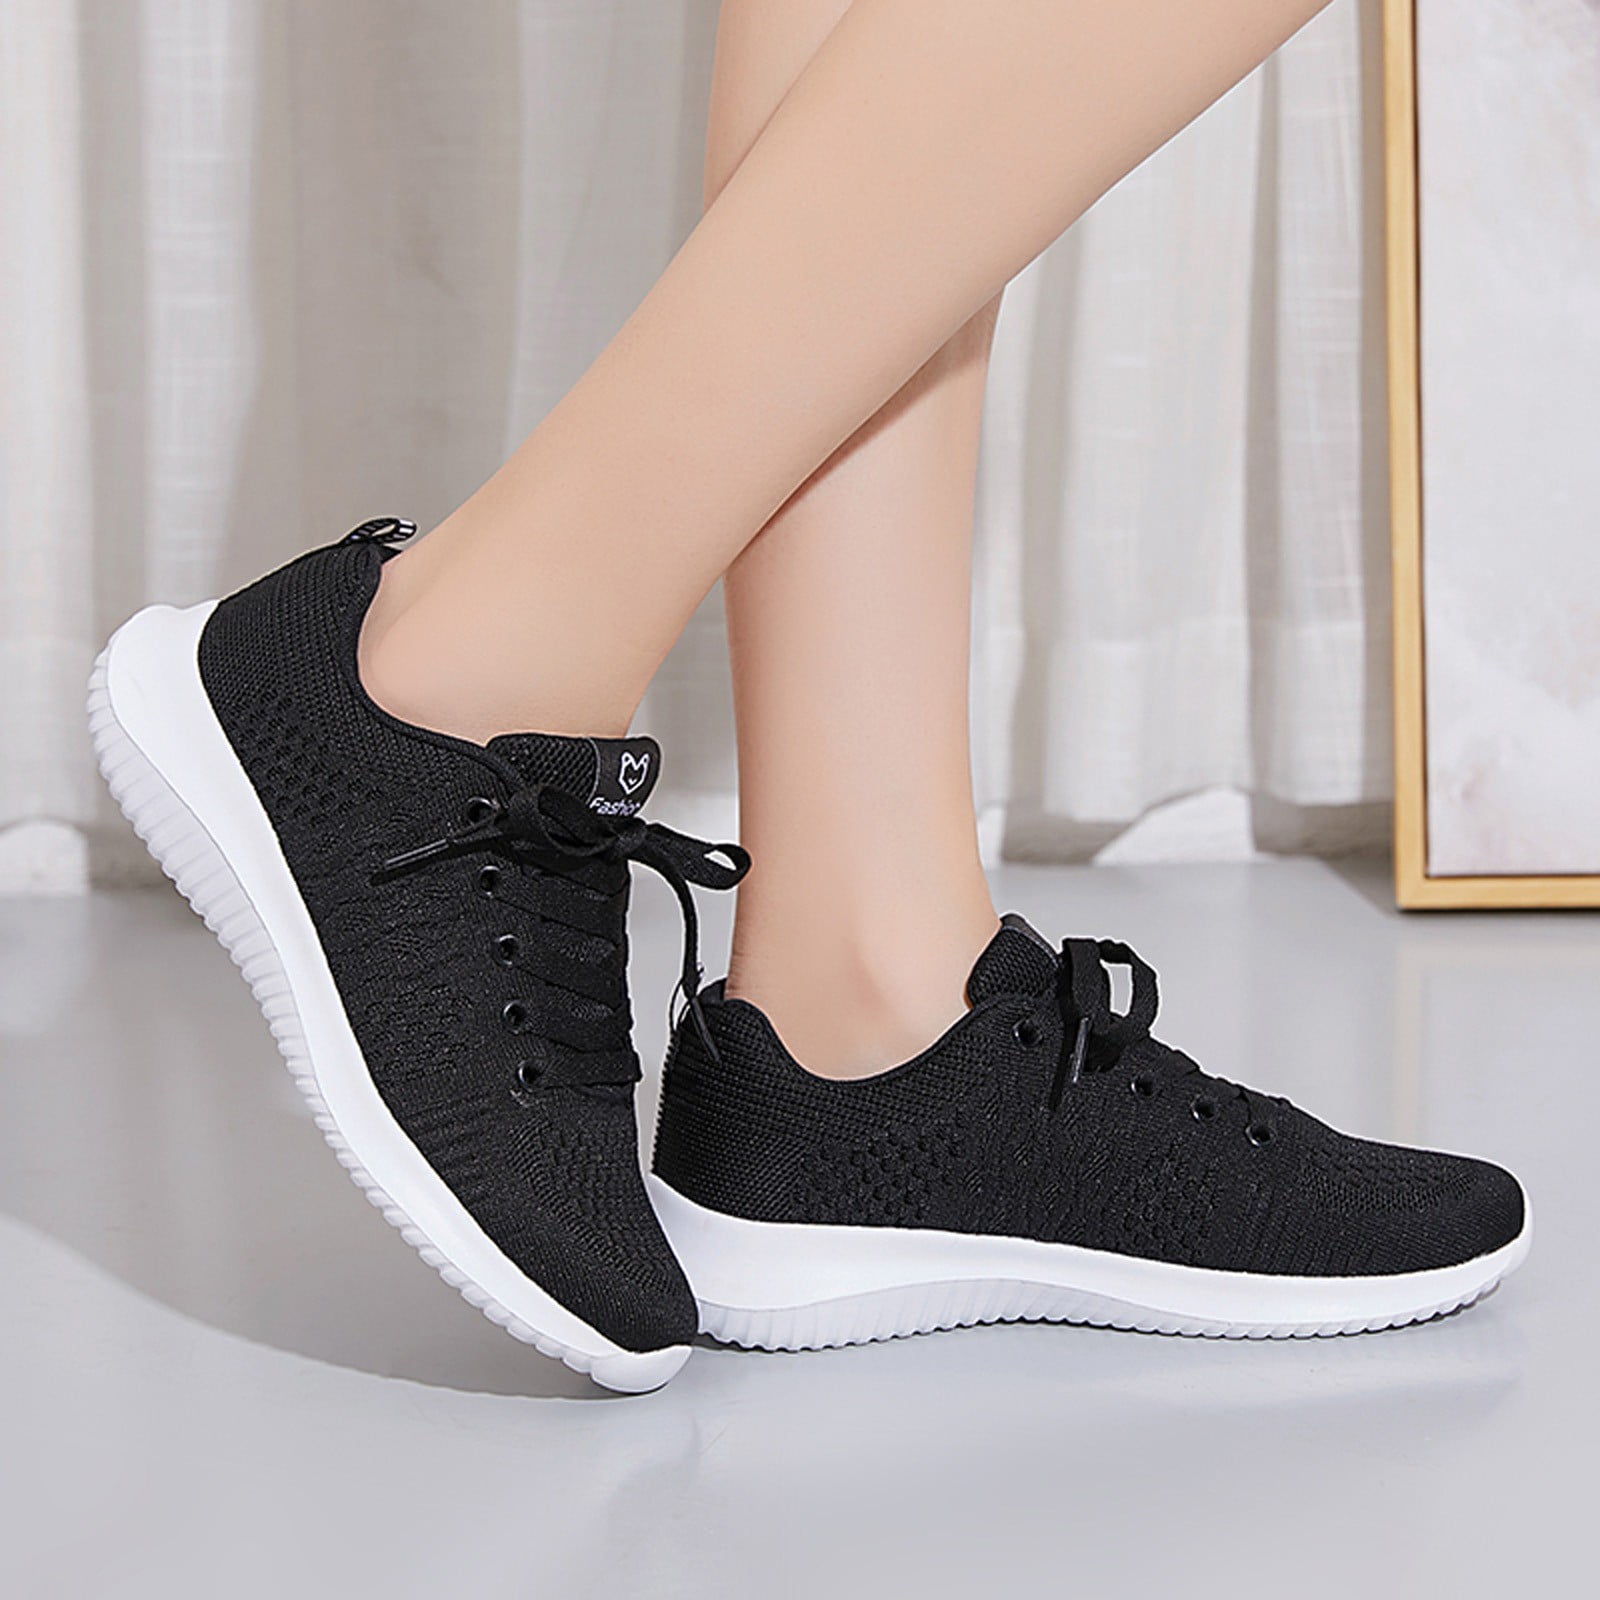 Dressin Womens Sport Shoes Ladies Summer Mesh Breathable Shoes Casual Cute Sole Platform Flats Sneakers